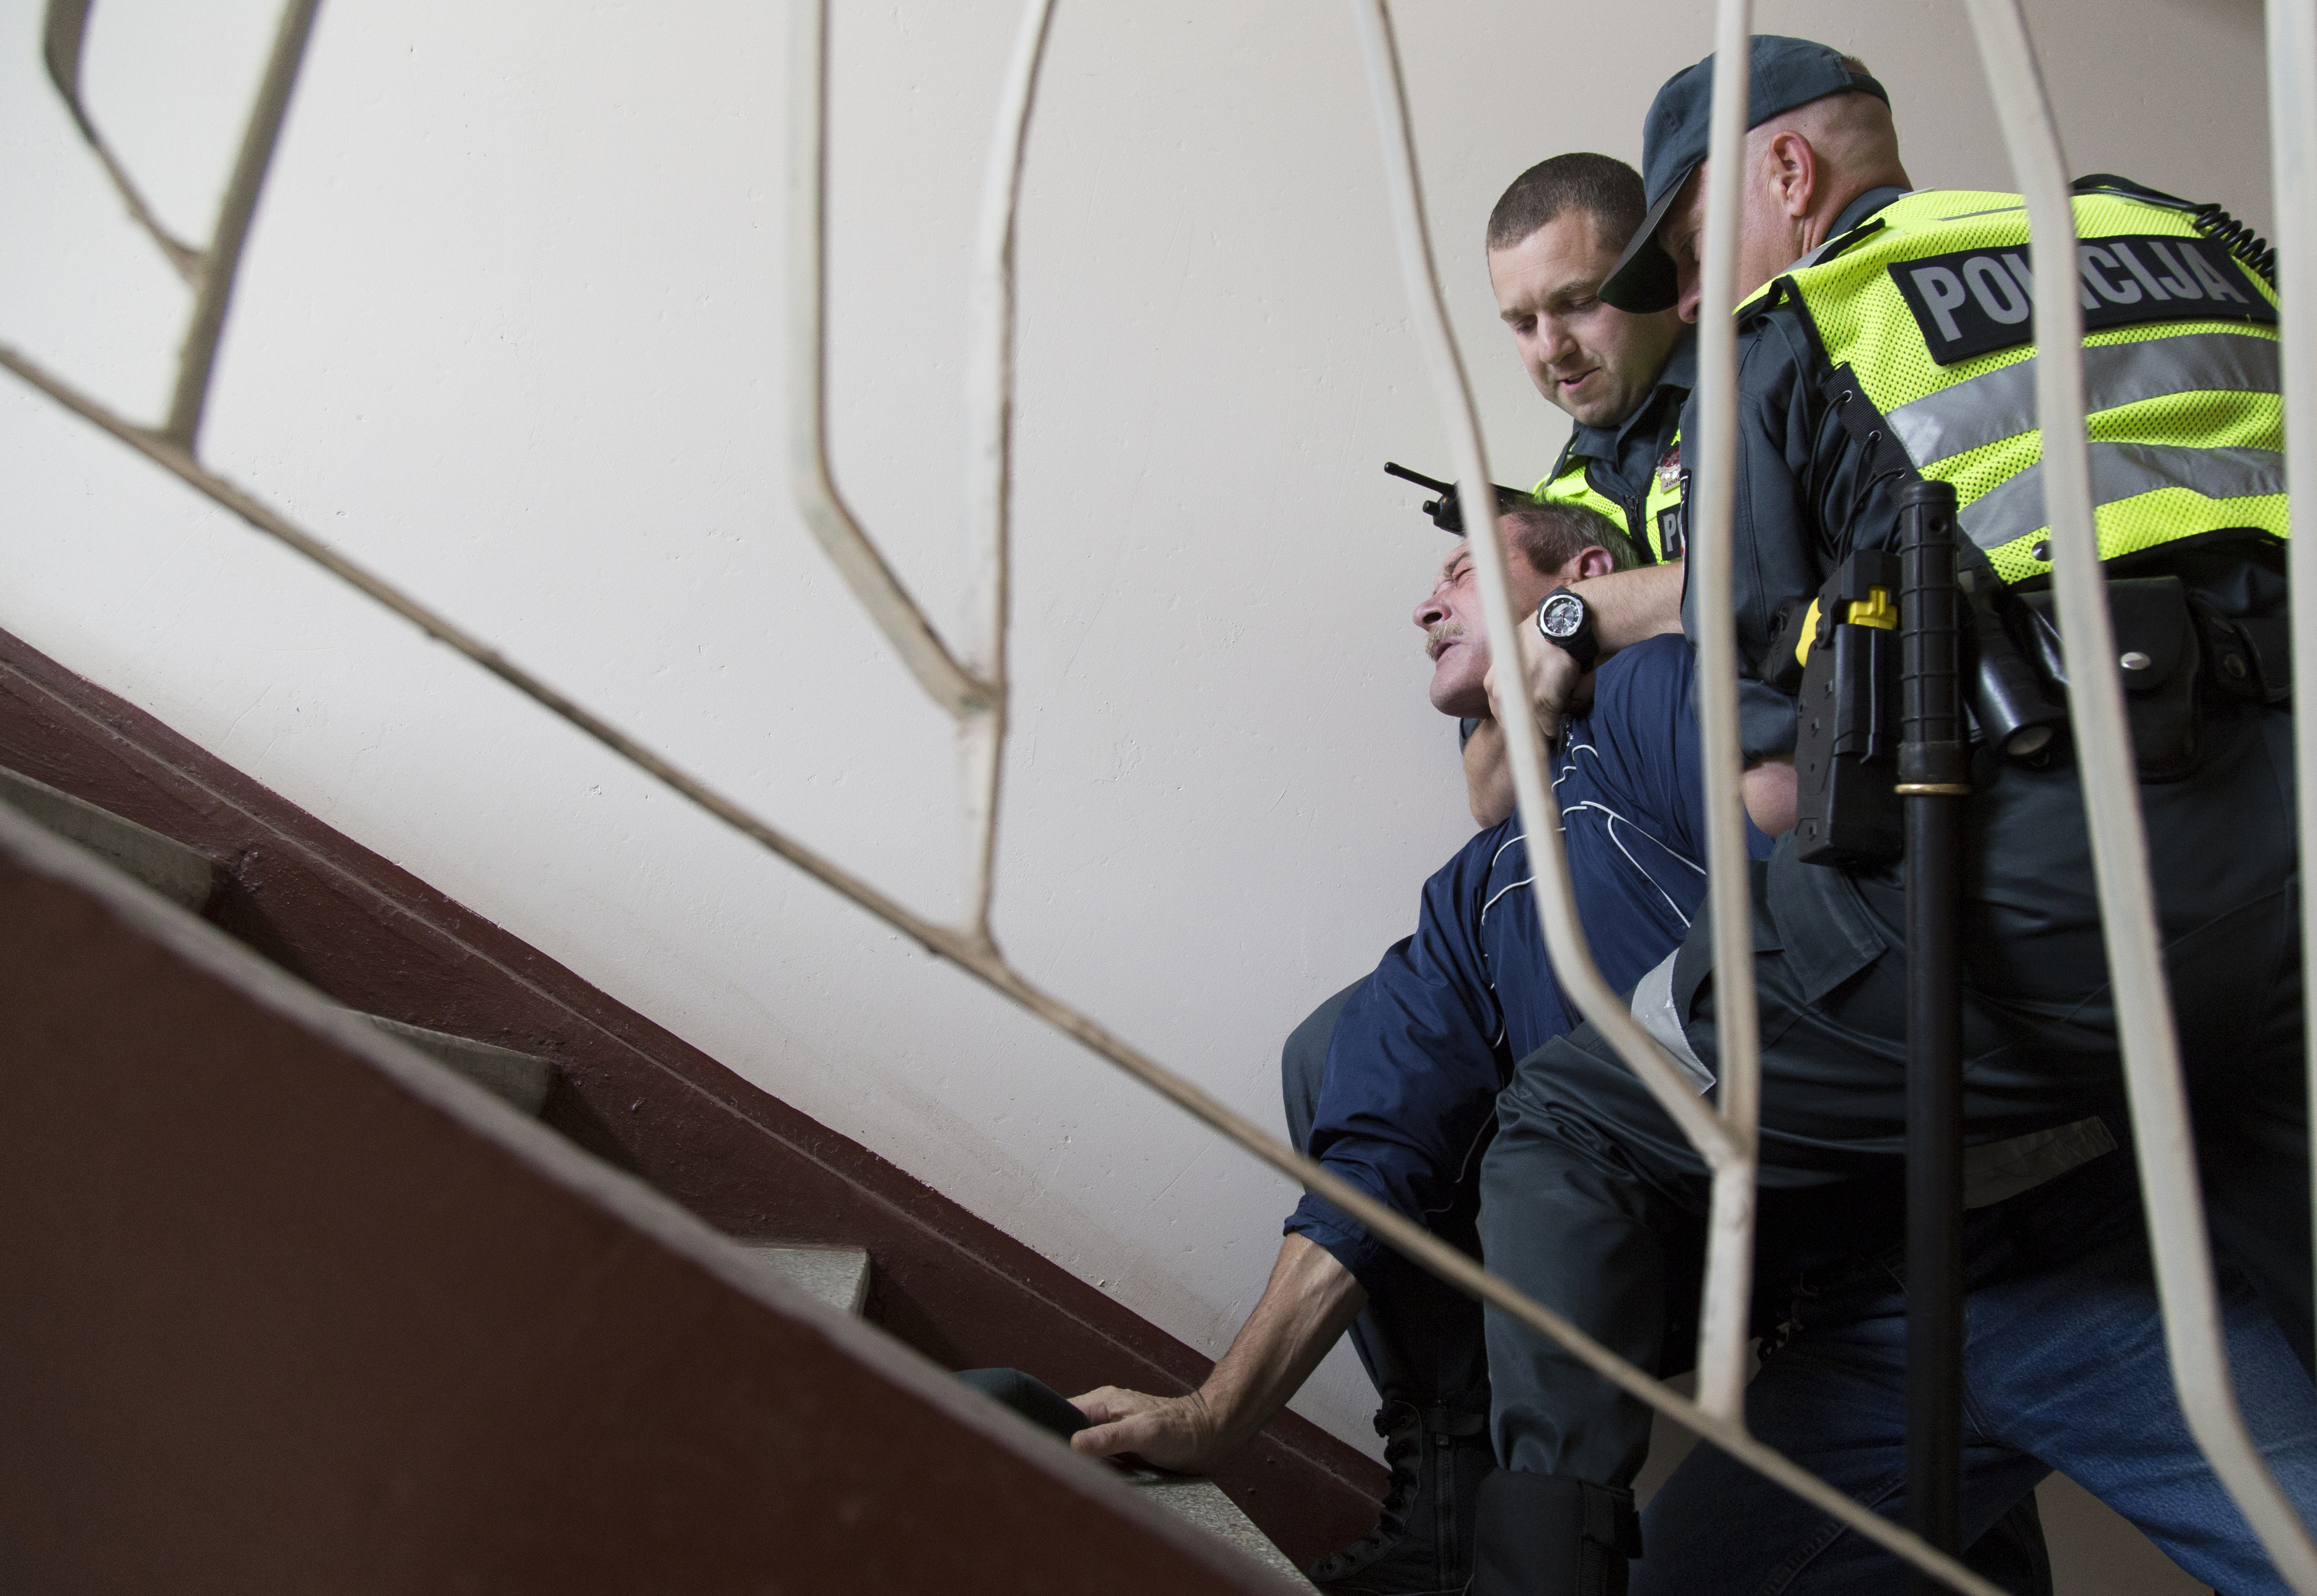 Vilnius police officers Zilvinas Adomaitis and Andrey Gubanov react to a man resisting arrest in an apartment stairwell. The drunk man's wife, who claimed her husband threatened to kill her, made the call for police; however, she did not want to press charges. This was one of two calls that day involving a drunk man threatening his wife. He was legally drunk based on the breathalyzer test. Based on figures from the World Health Organization's recent "Global Report on Alcohol and Health 2014," Lithuania is listed as the third heaviest drinking country in the world. Among other things, alcoholism is seen as a contributing factor to Lithuania's suicide rate.